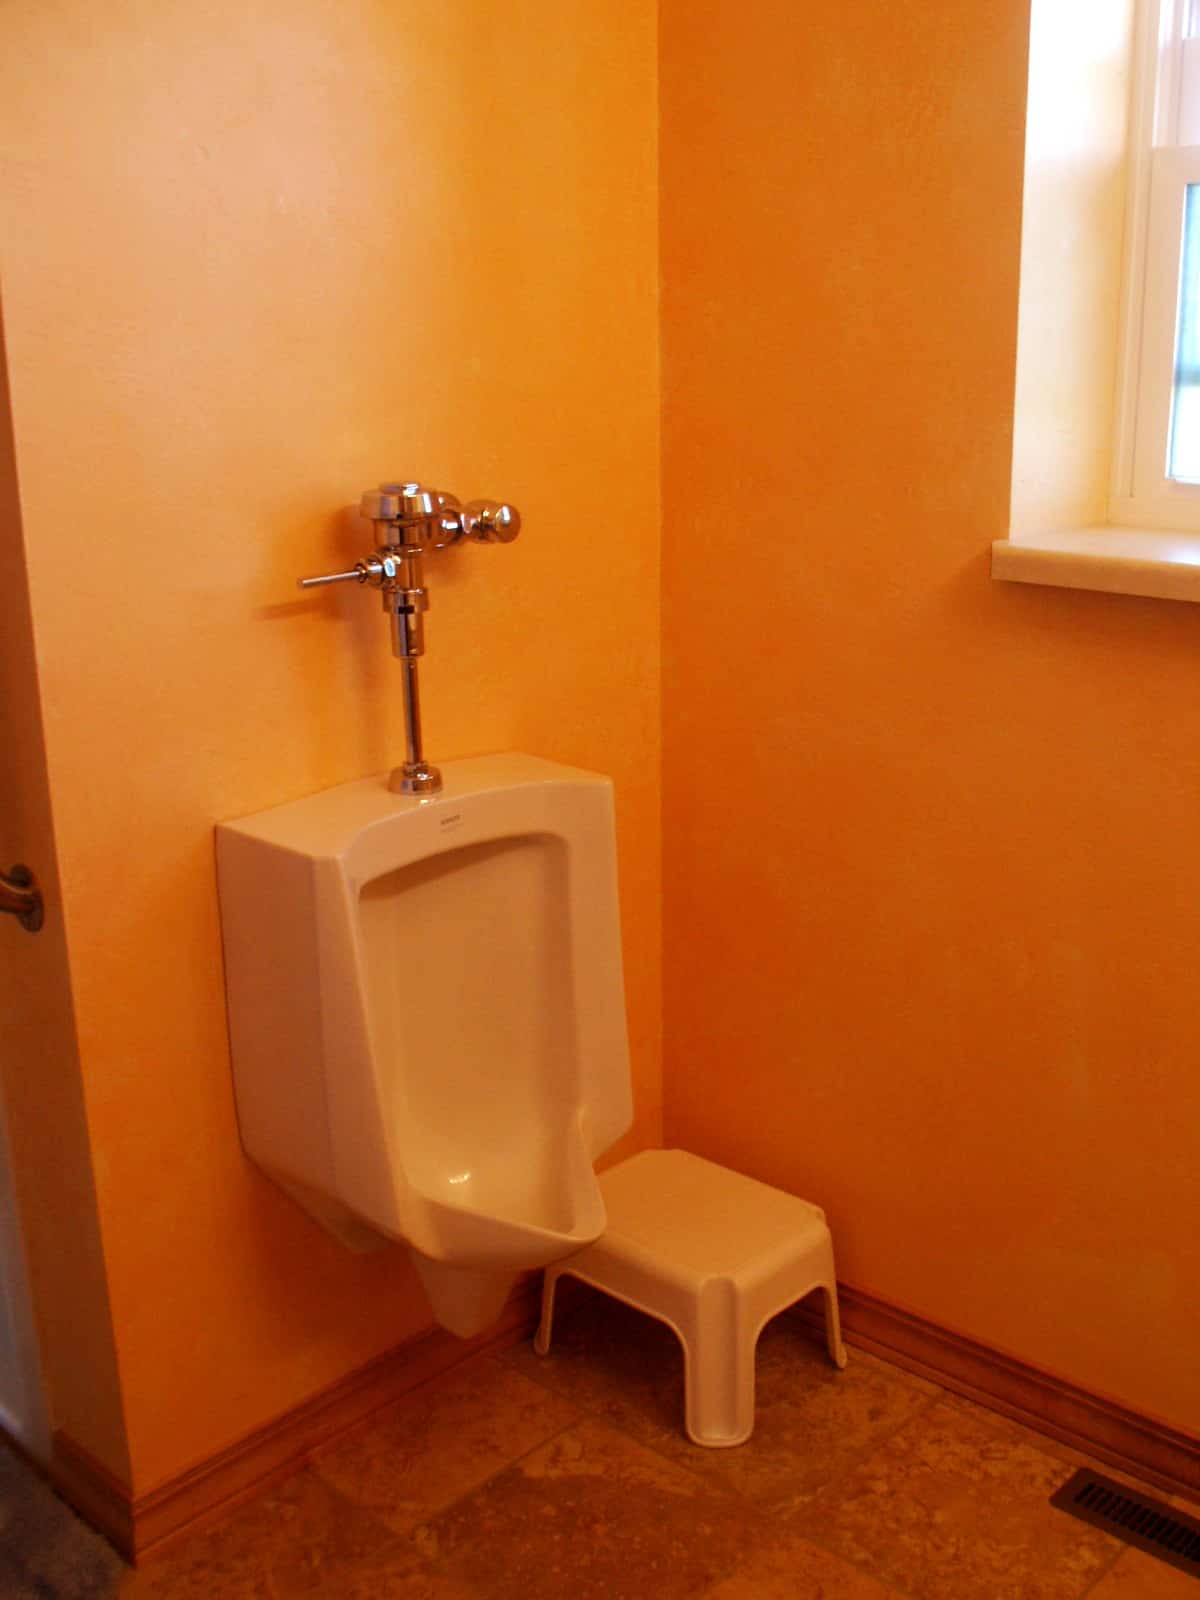 home bathrooms with urinals photo - 1